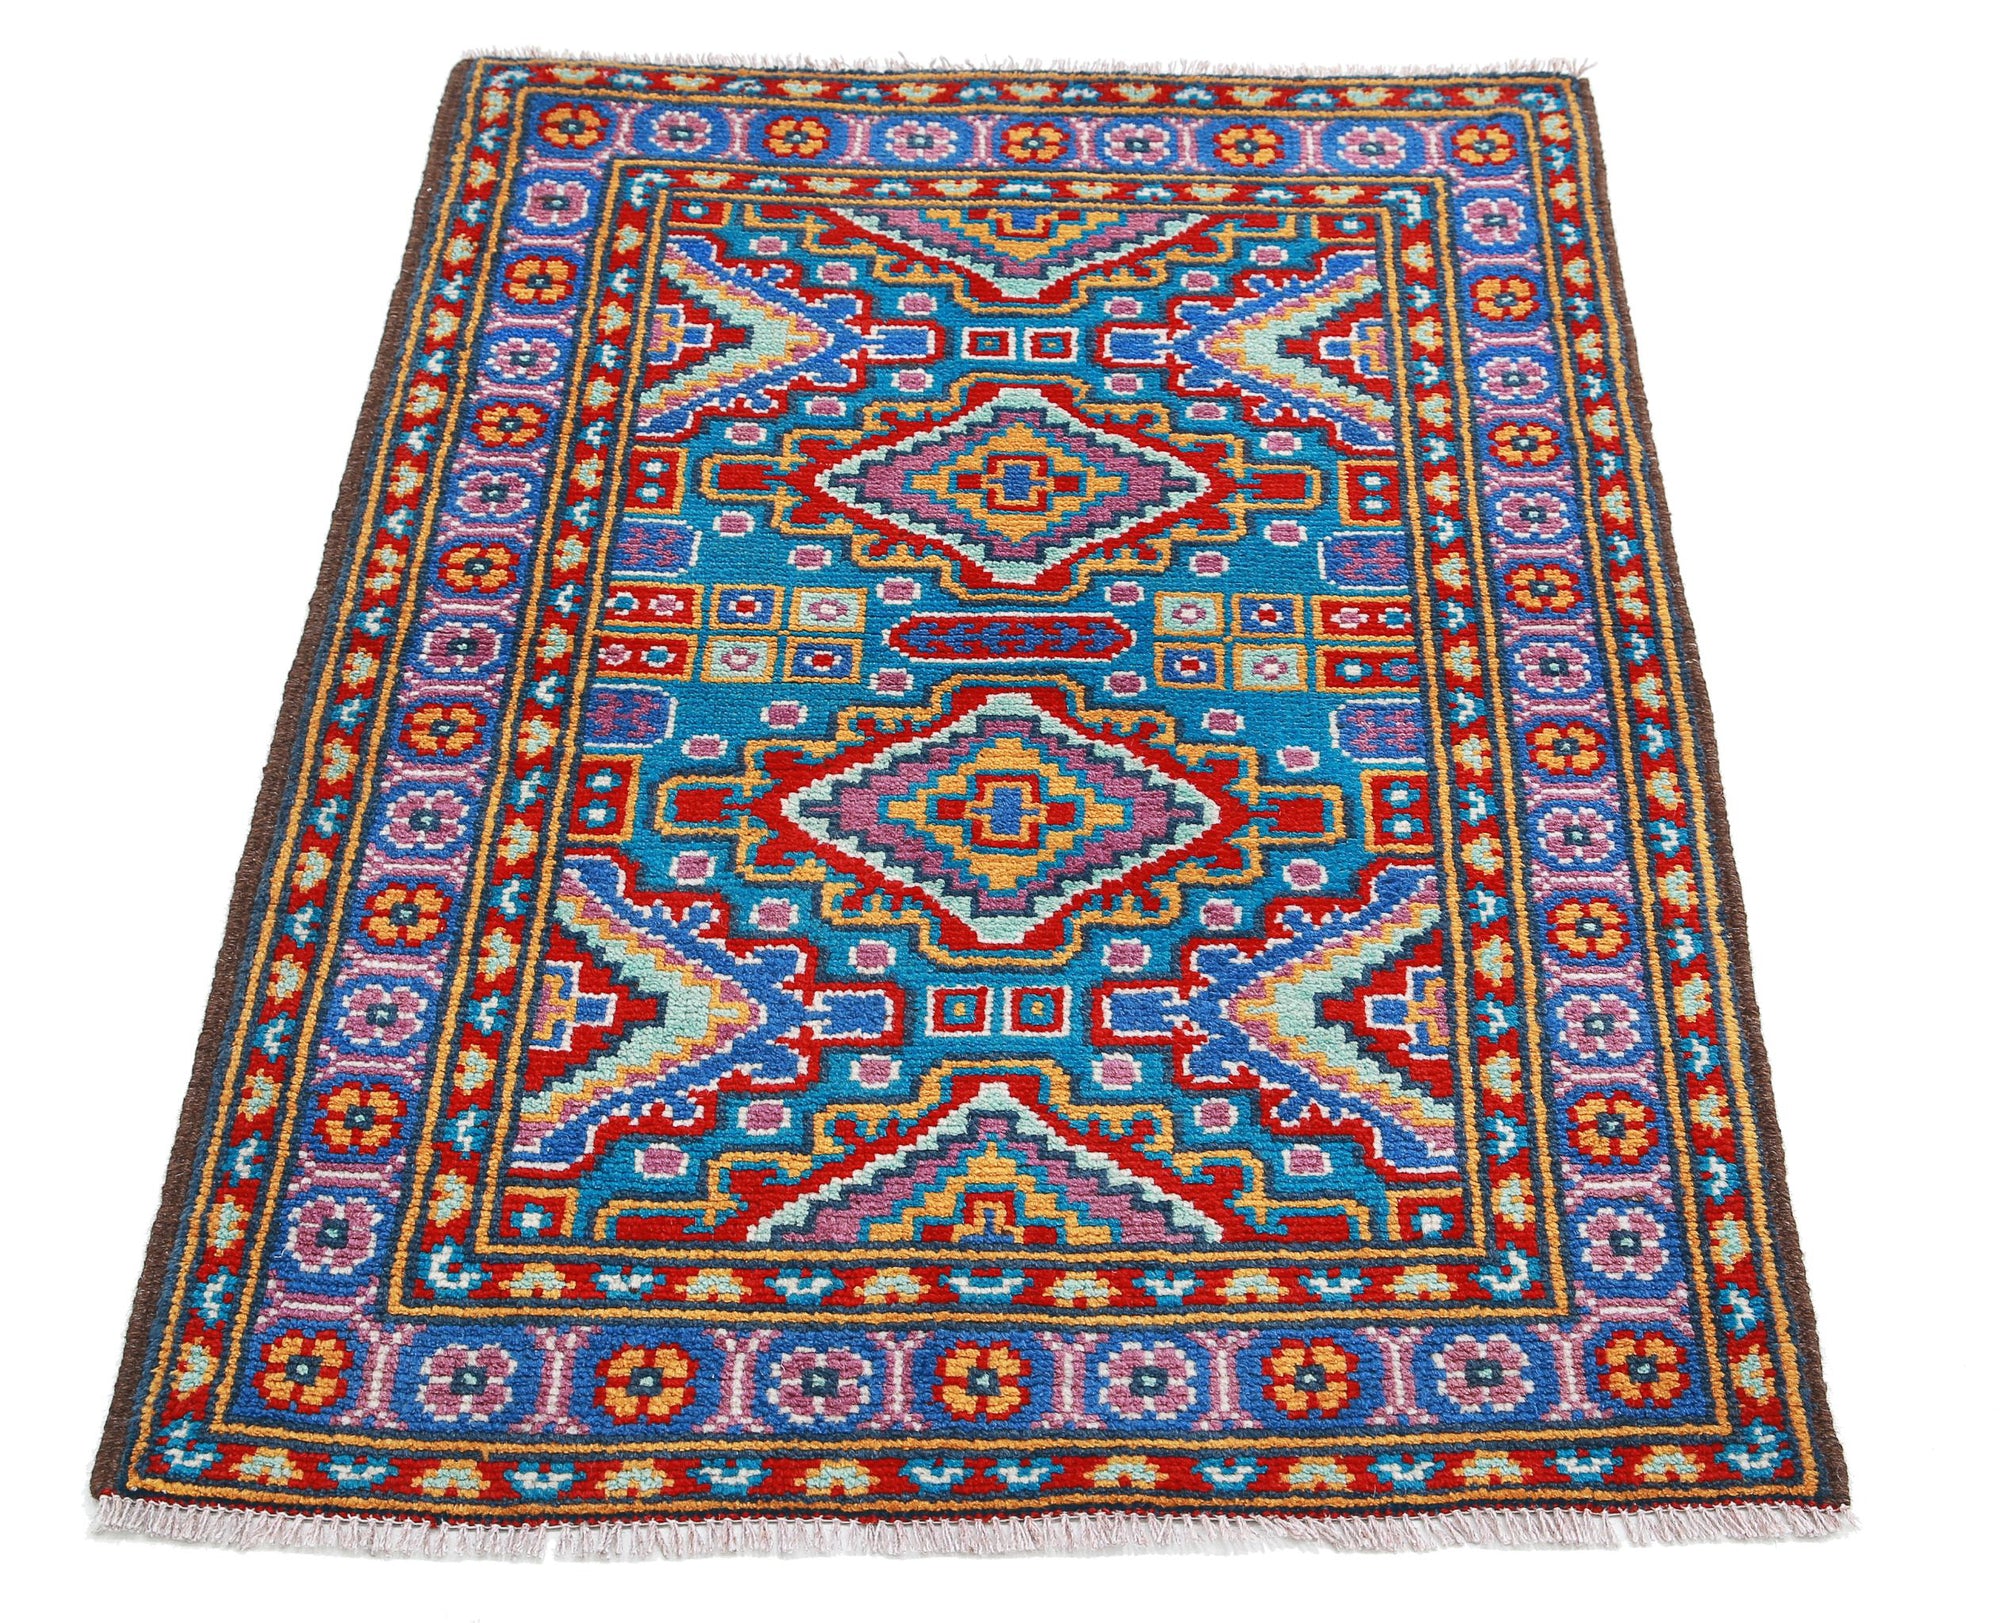 Revival-hand-knotted-qarghani-wool-rug-5014010-3.jpg